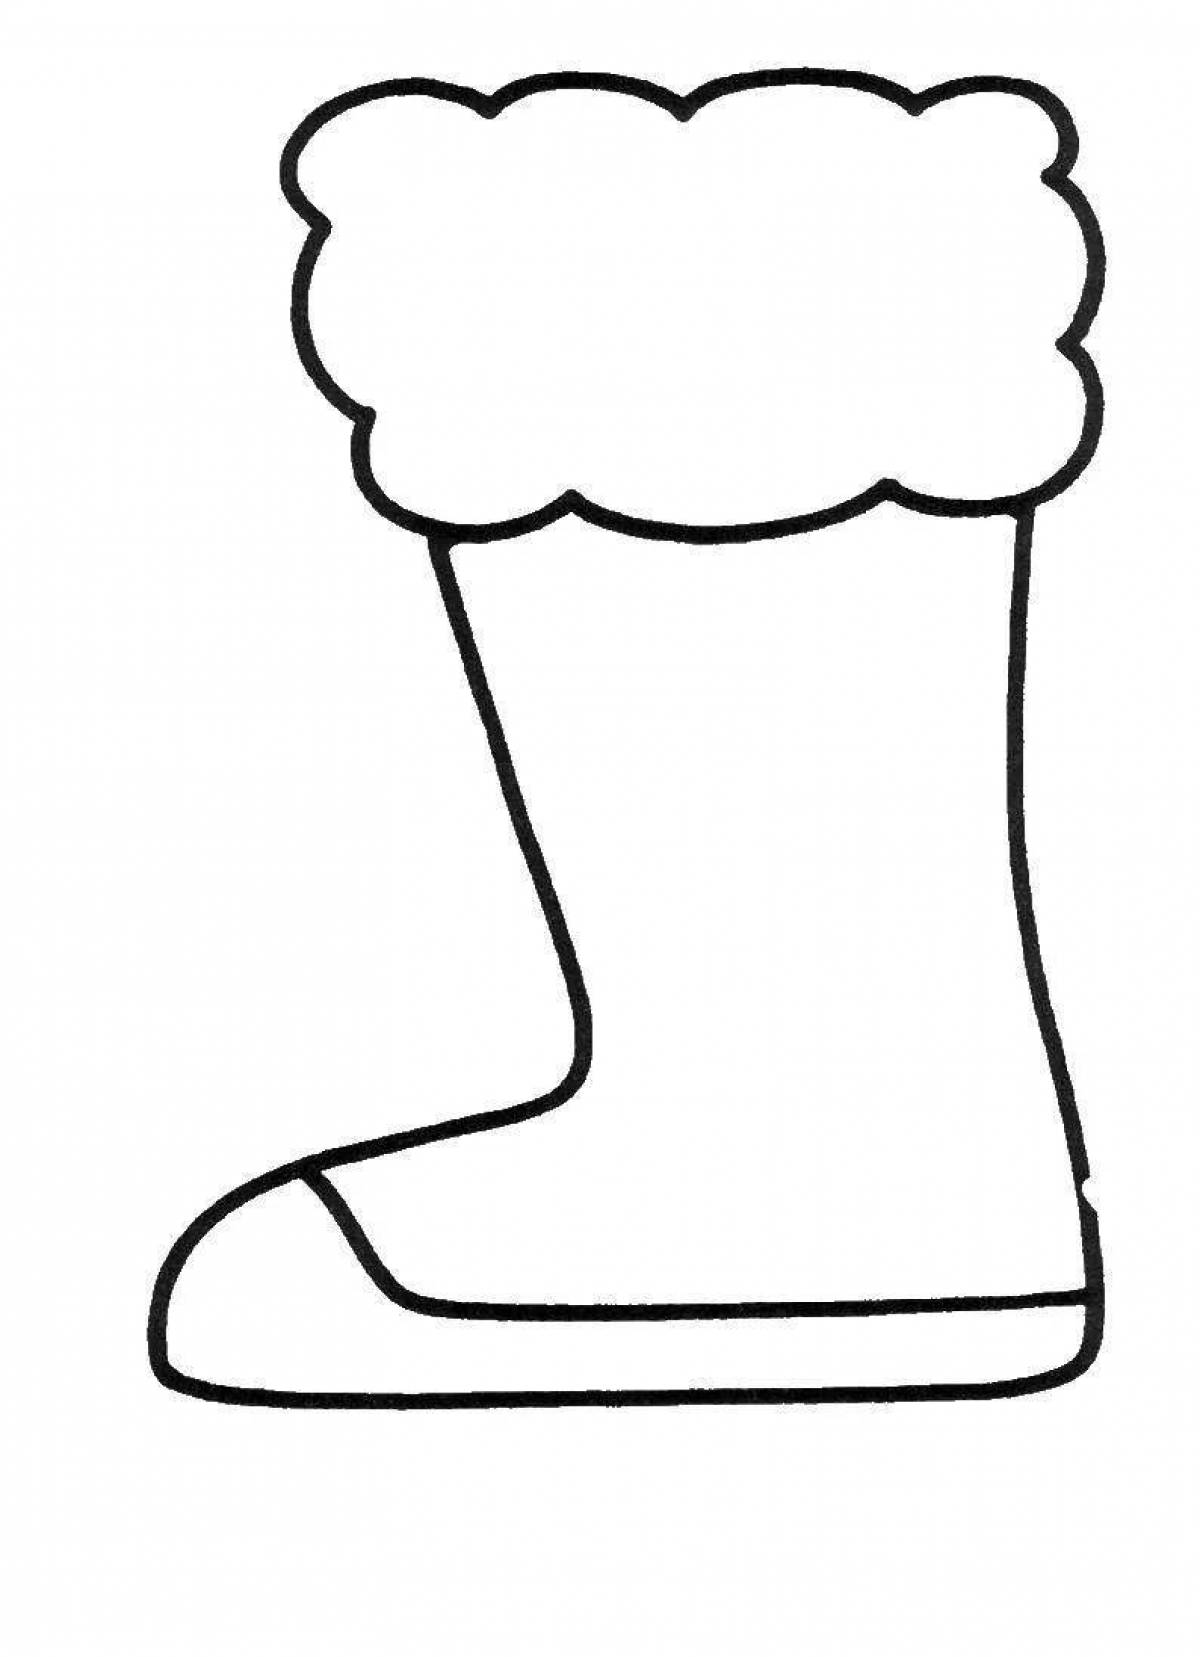 Shining boots coloring page